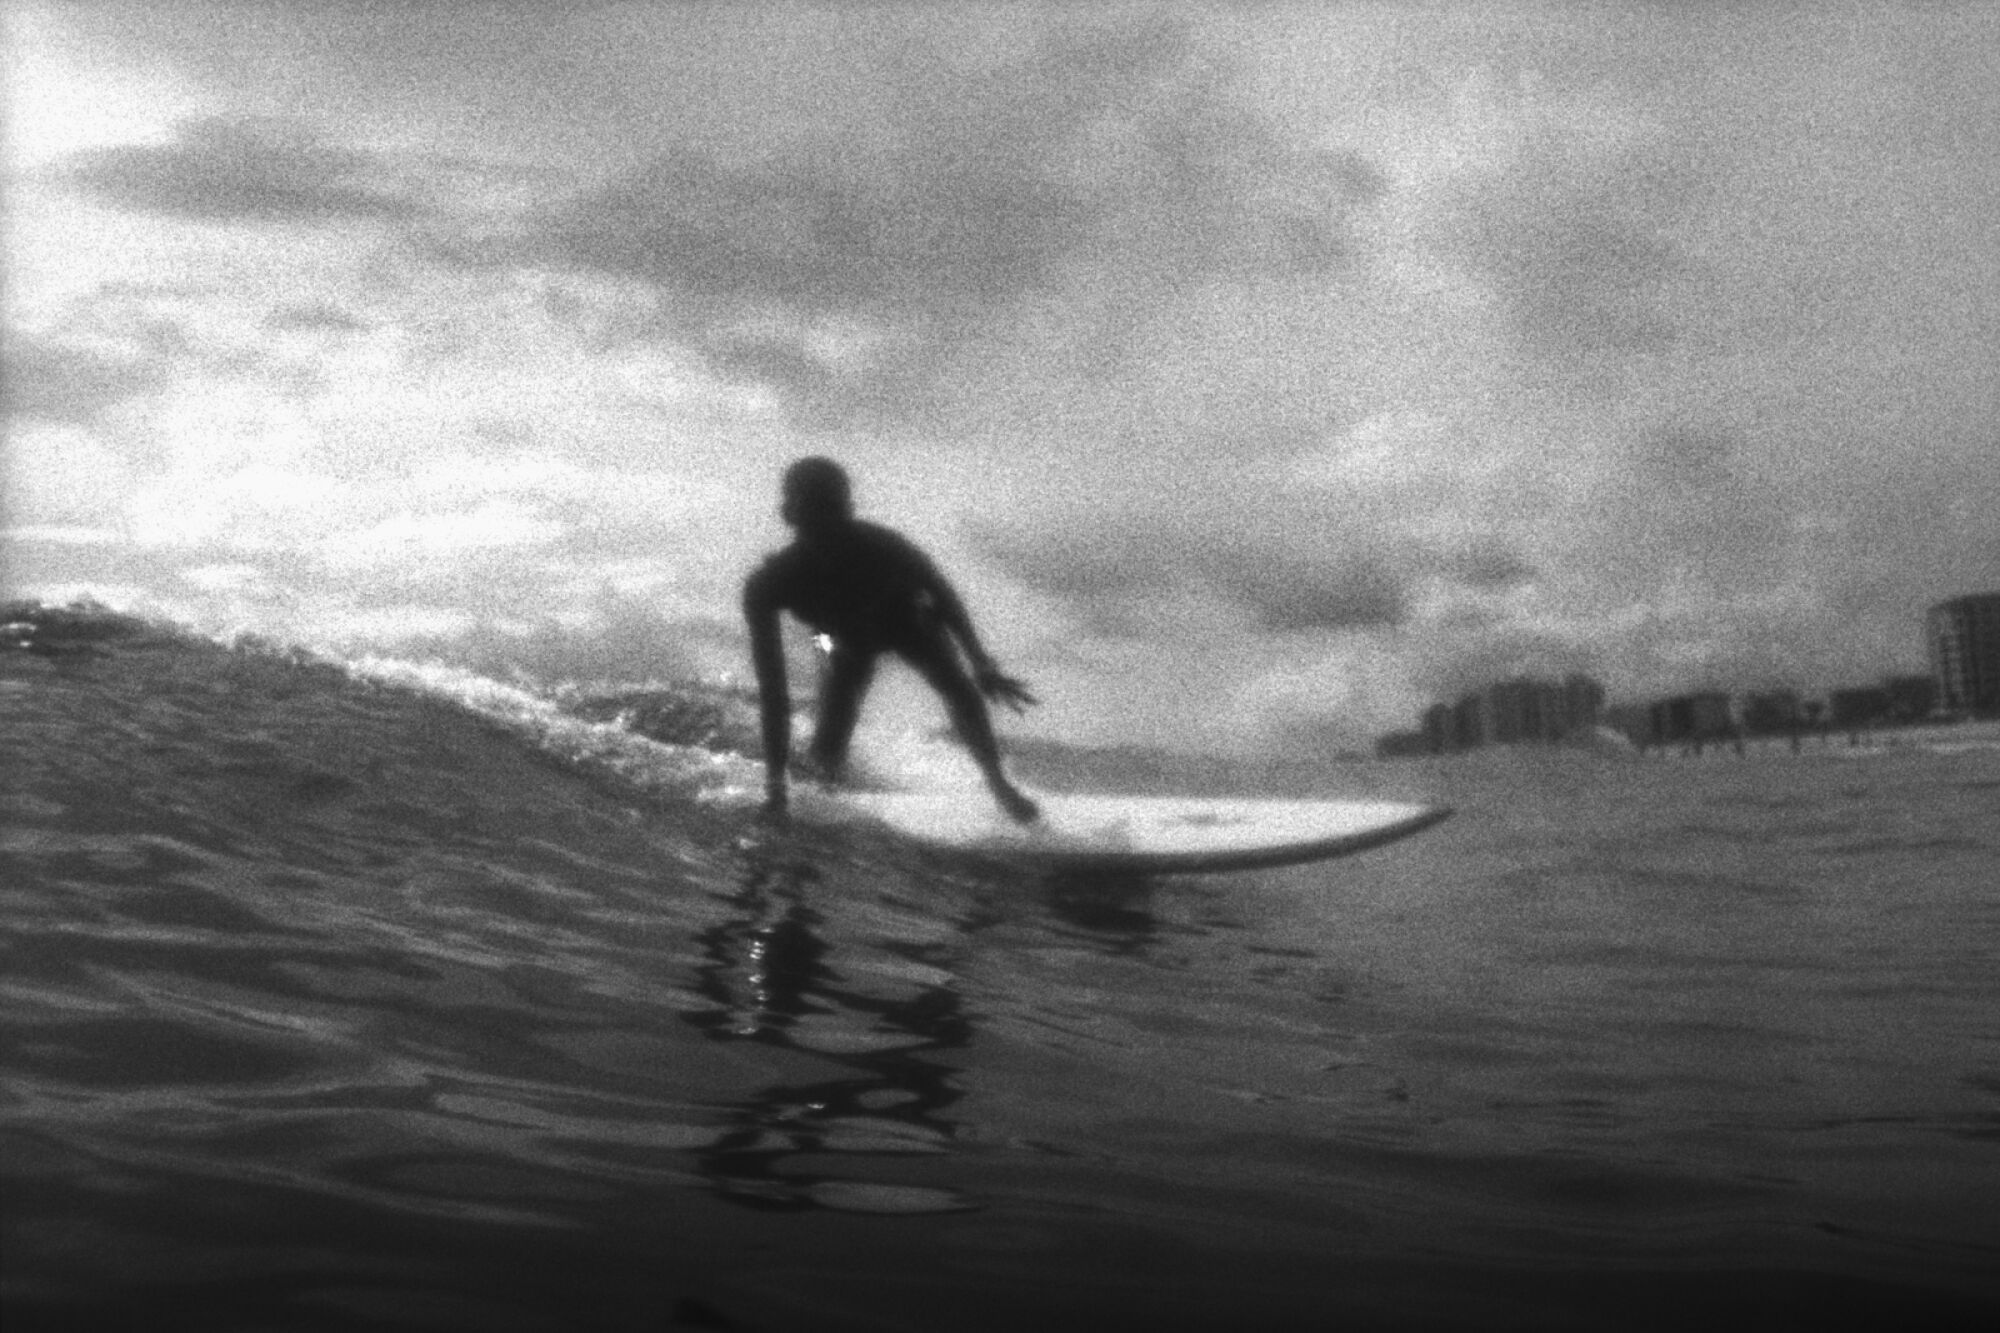 A black and white image of a surfer.